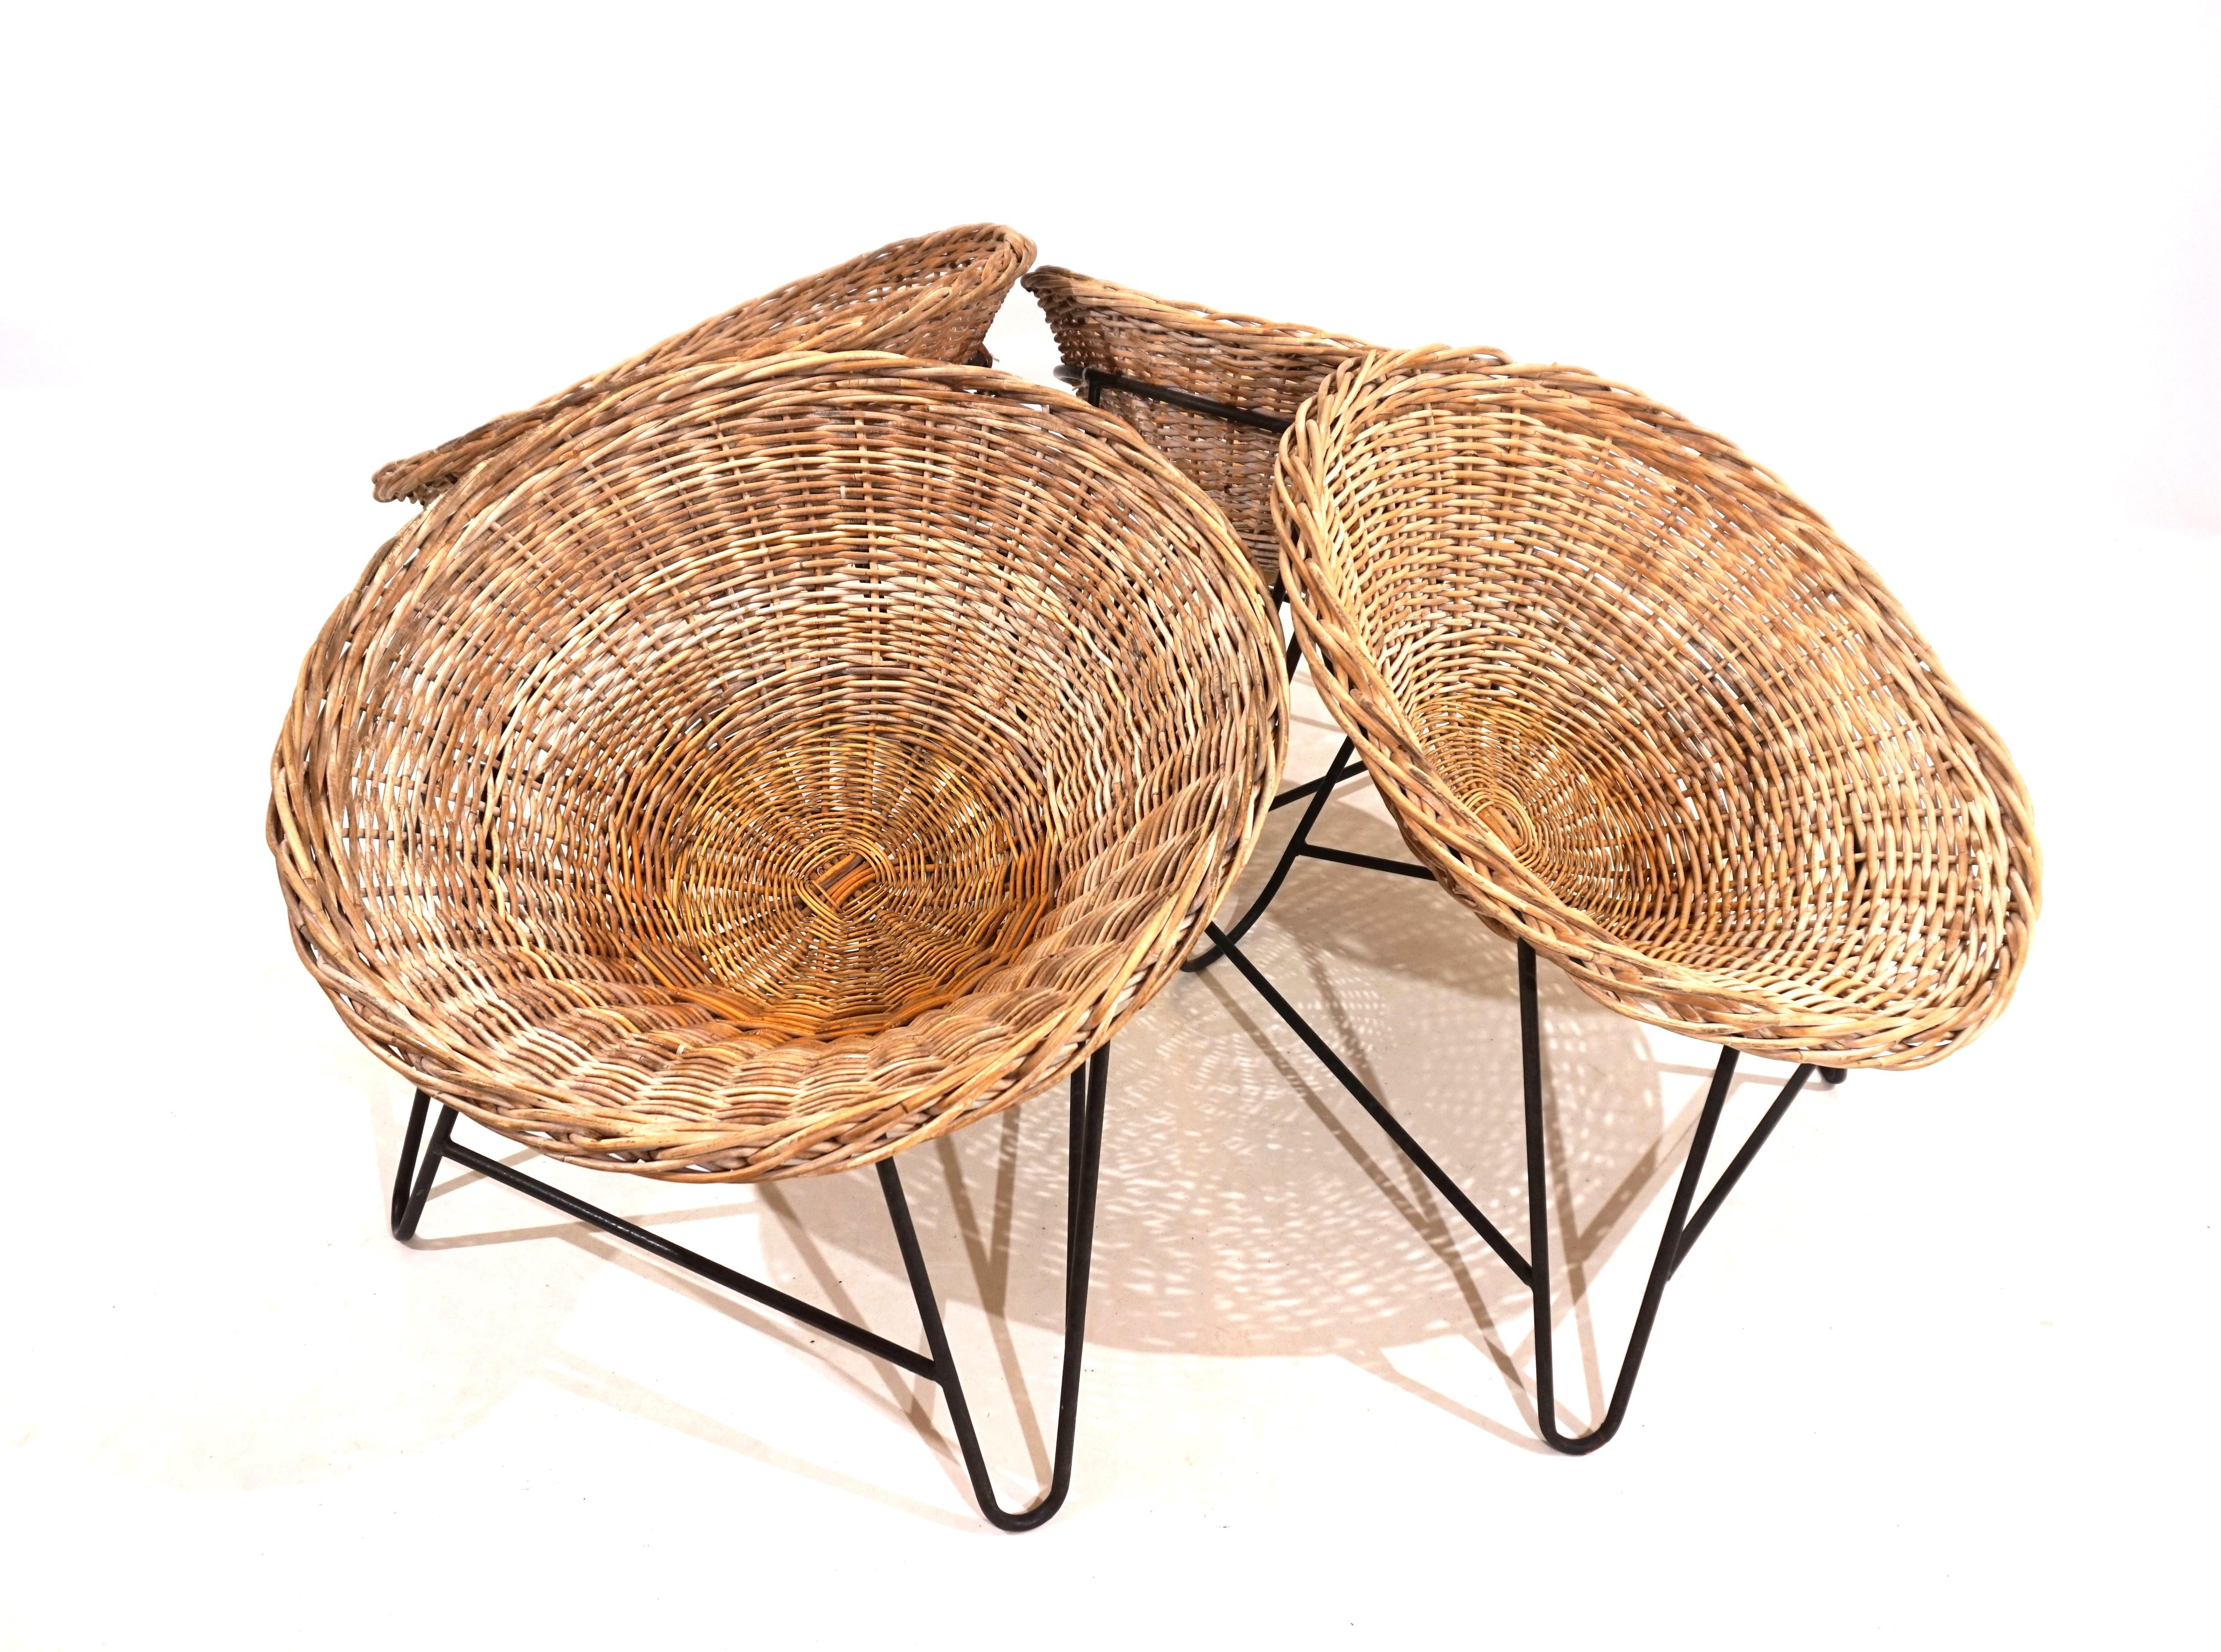 The set of 4 rattan pod chairs is in good condition. The wickerwork shows no signs of damage and is solid; the metal frame covered in black plastic has some of the plastic coating coming off and shows signs of wear. The chairs have developed a